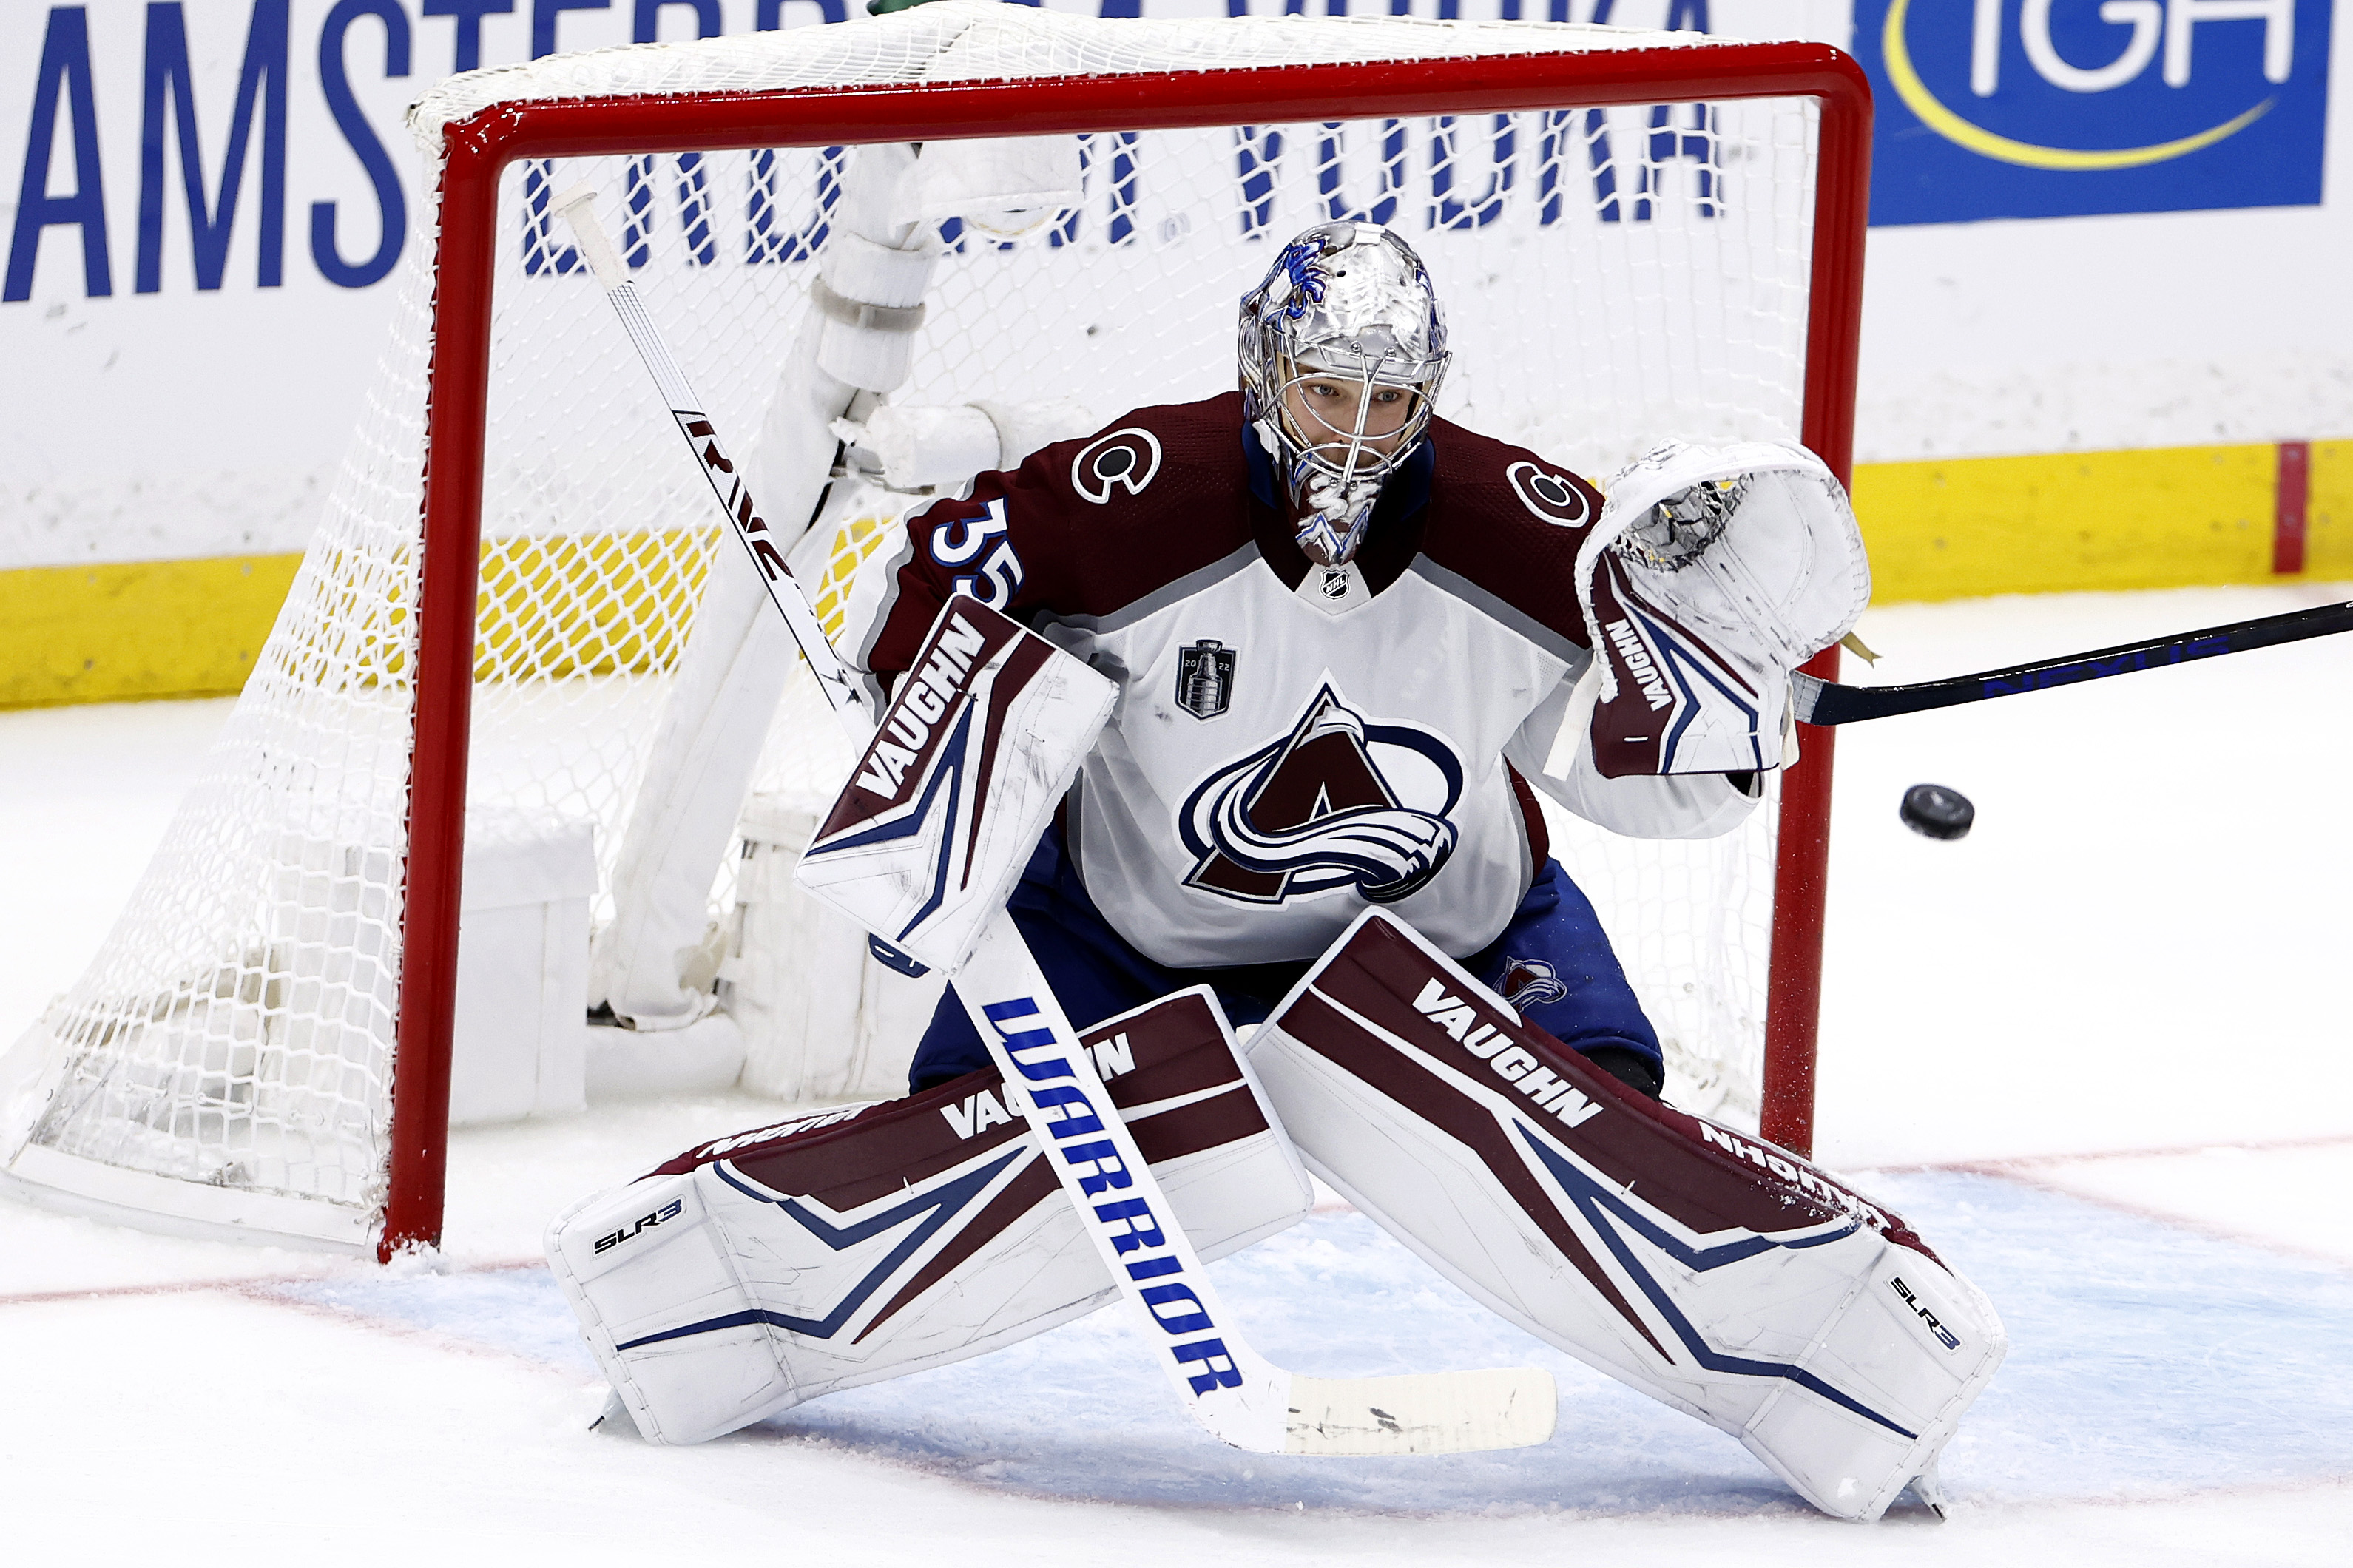 Avalanche Journal: Stanley Cup Film and under-the-radar trade targets